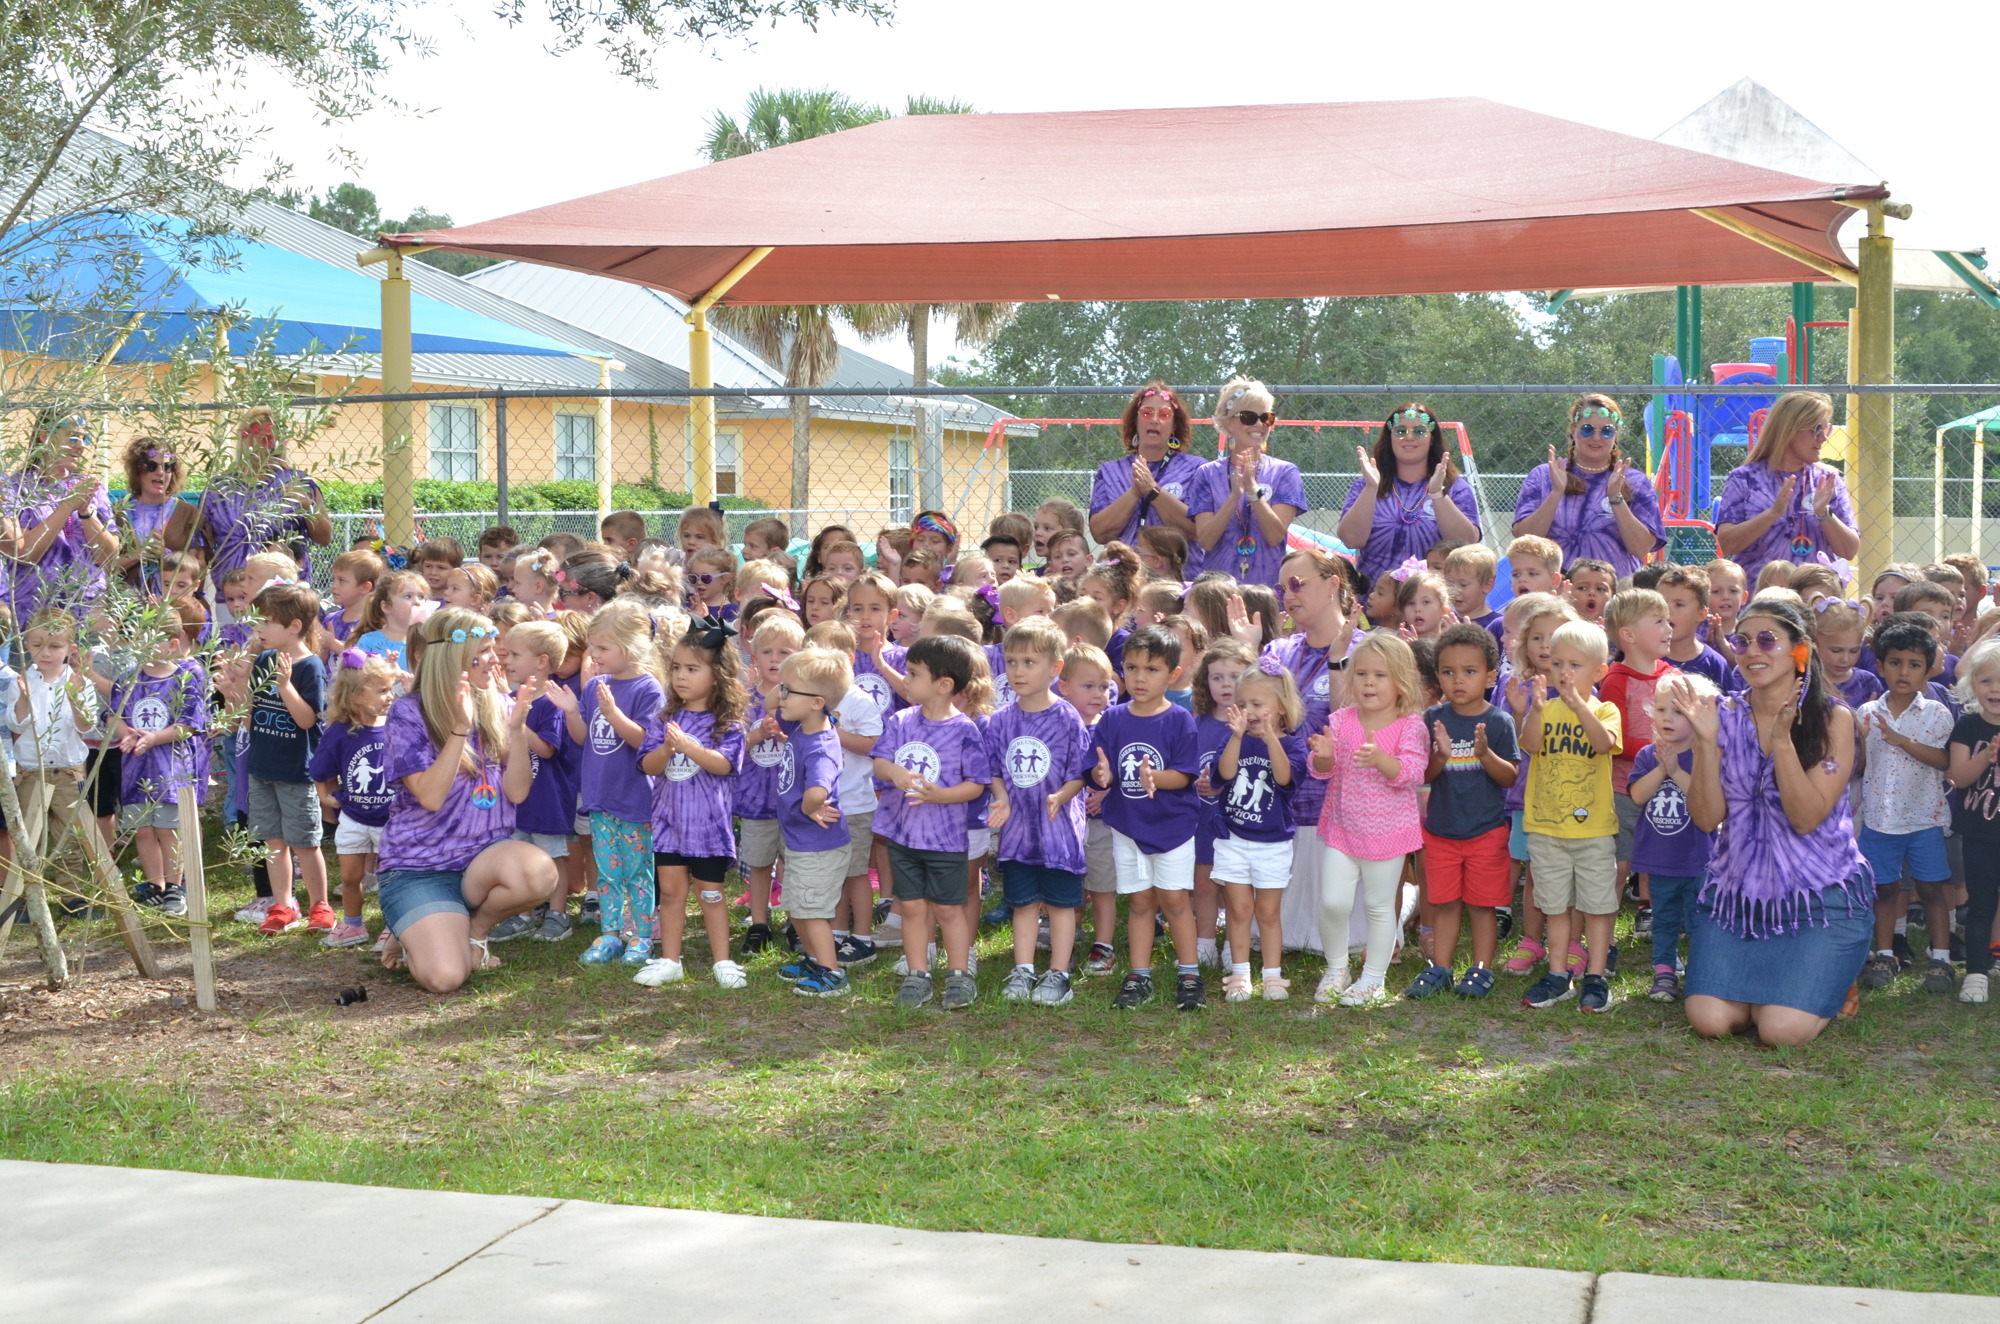 The celebration at Windermere Union Preschool included lively singing from the students.